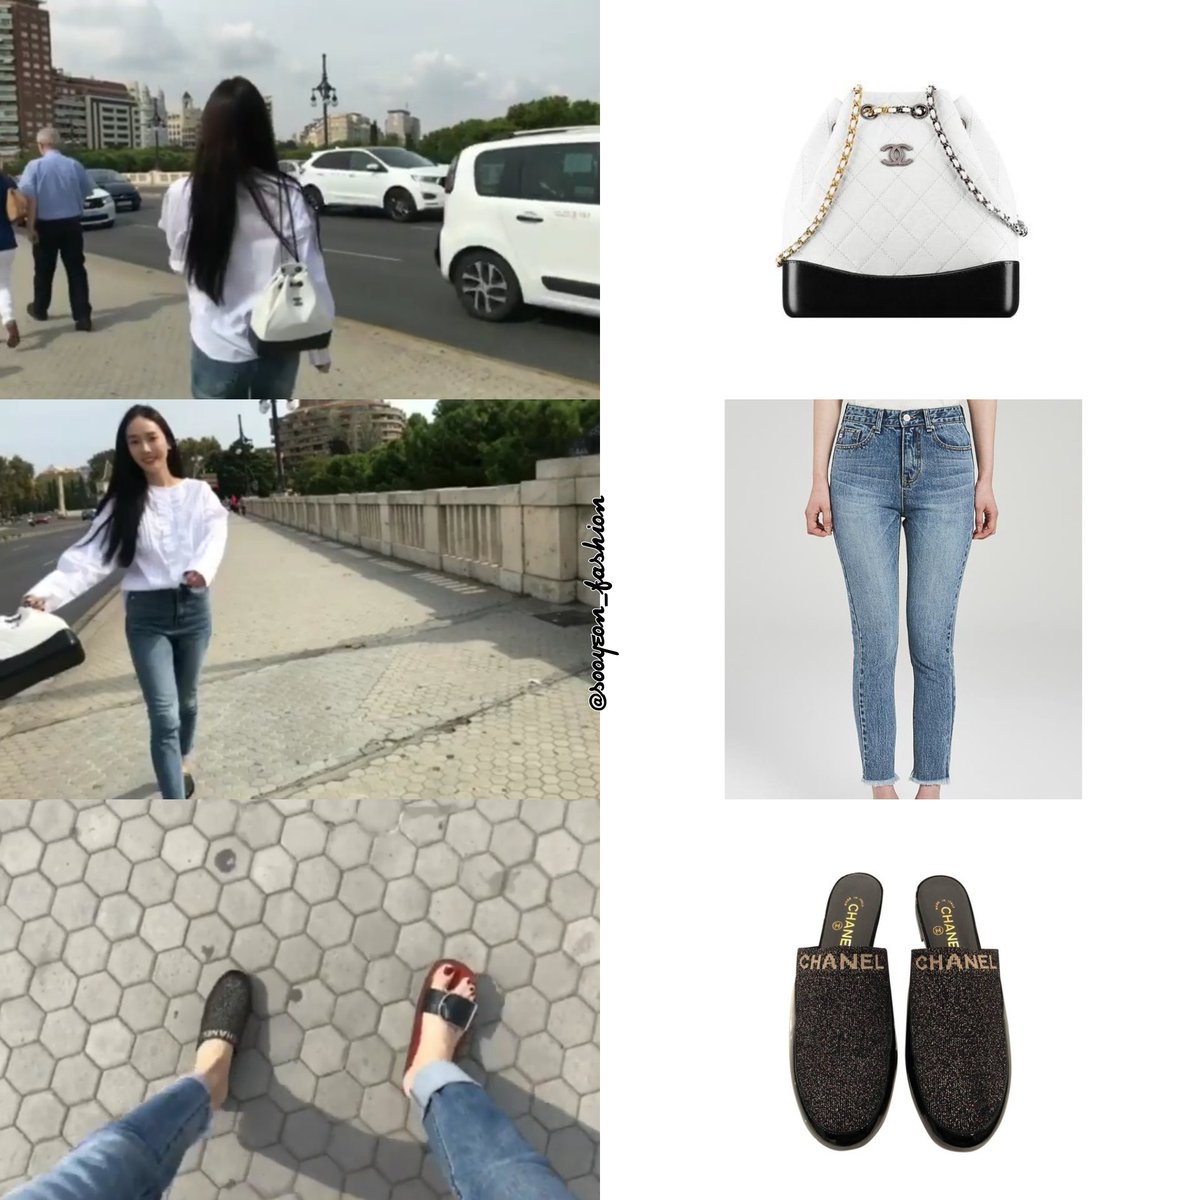 JESSICA JUNG Style & Fashion — Chanel: Fabric espadrilles Worn with:  Topshop